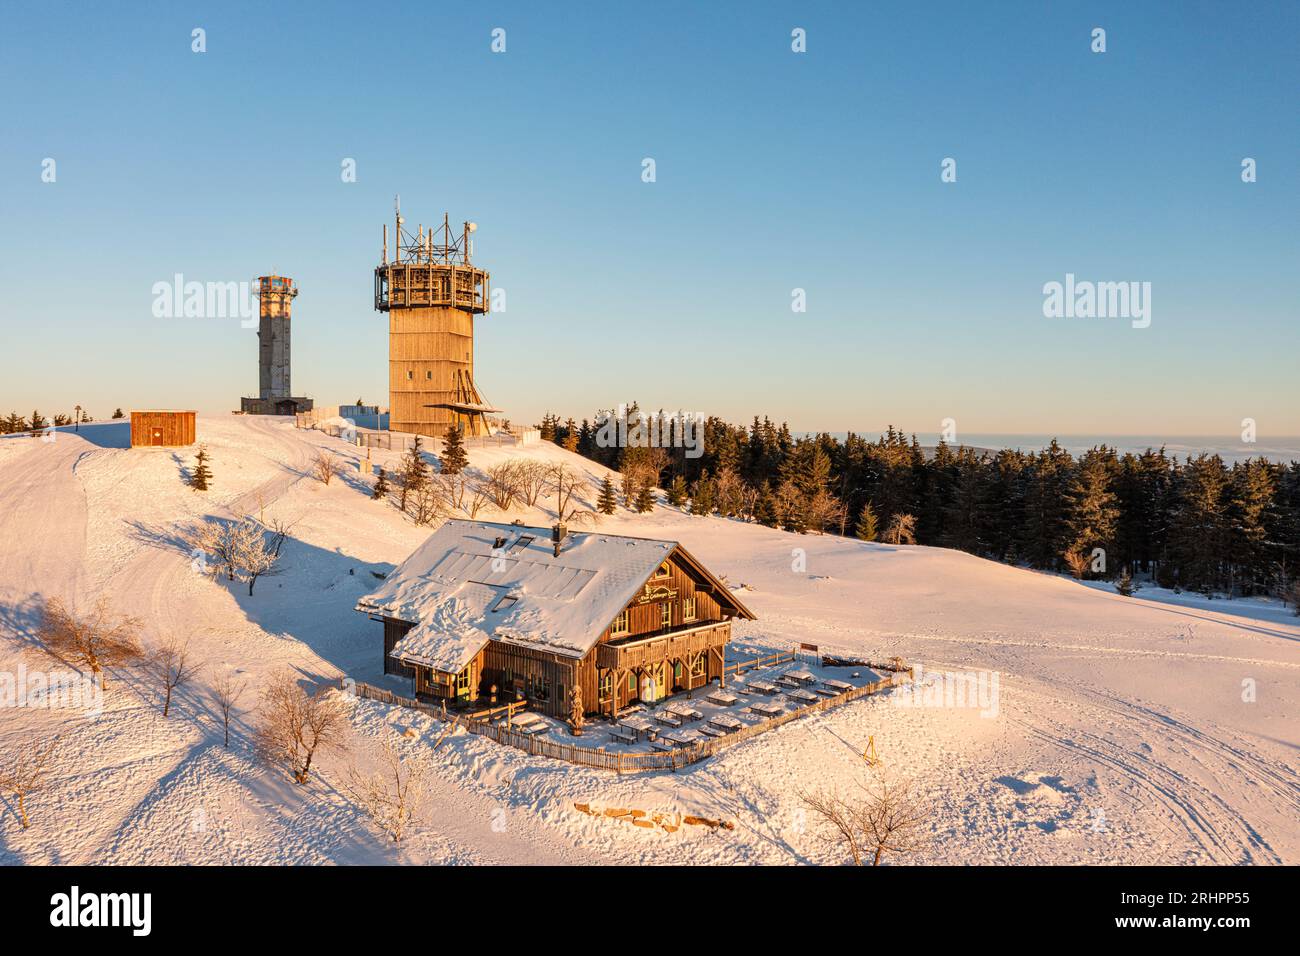 Germany, Thuringia, Suhl, Gehlberg, Schneekopf (second highest mountain of the Thuringian Forest), observation and climbing tower, telecommunications tower, New Gehlberg Hut, forest, snow Stock Photo